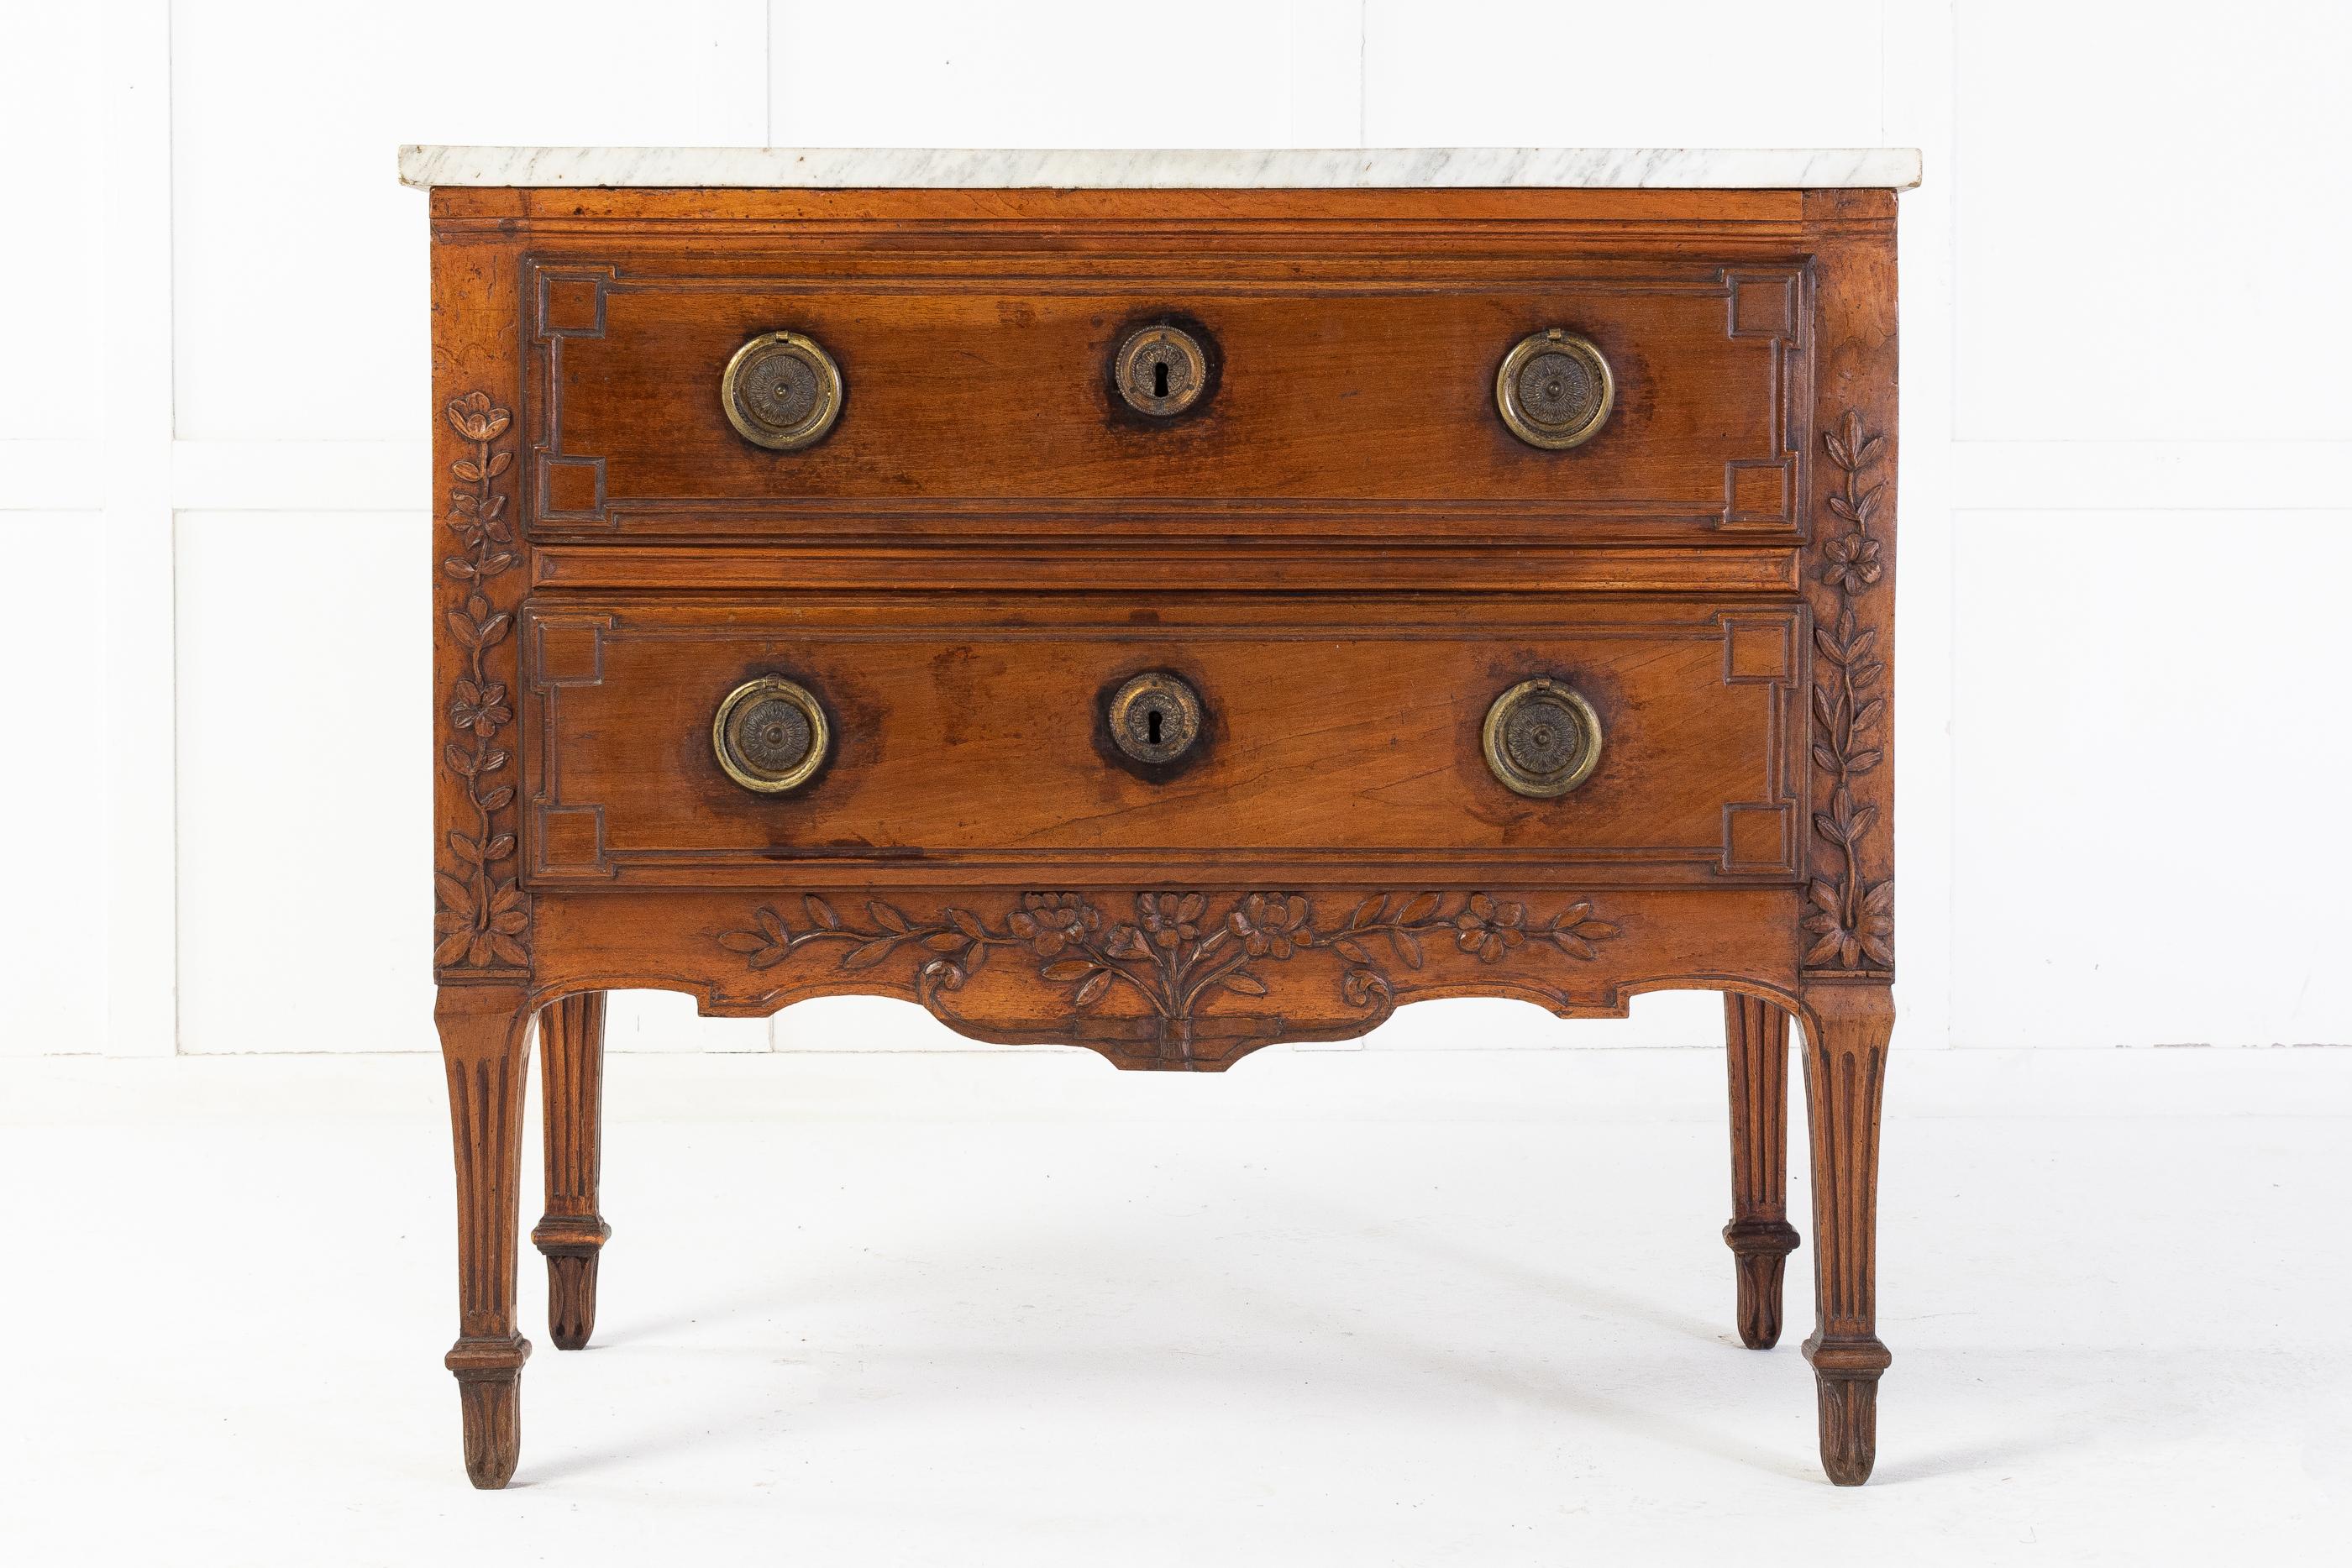 18th century French, walnut two drawer commode of nice proportions with a white marble top. The two moulded drawers are flanked by carvings of a floral design, above a carved shaped apron with similar floral design. Standing on shaped and fluted